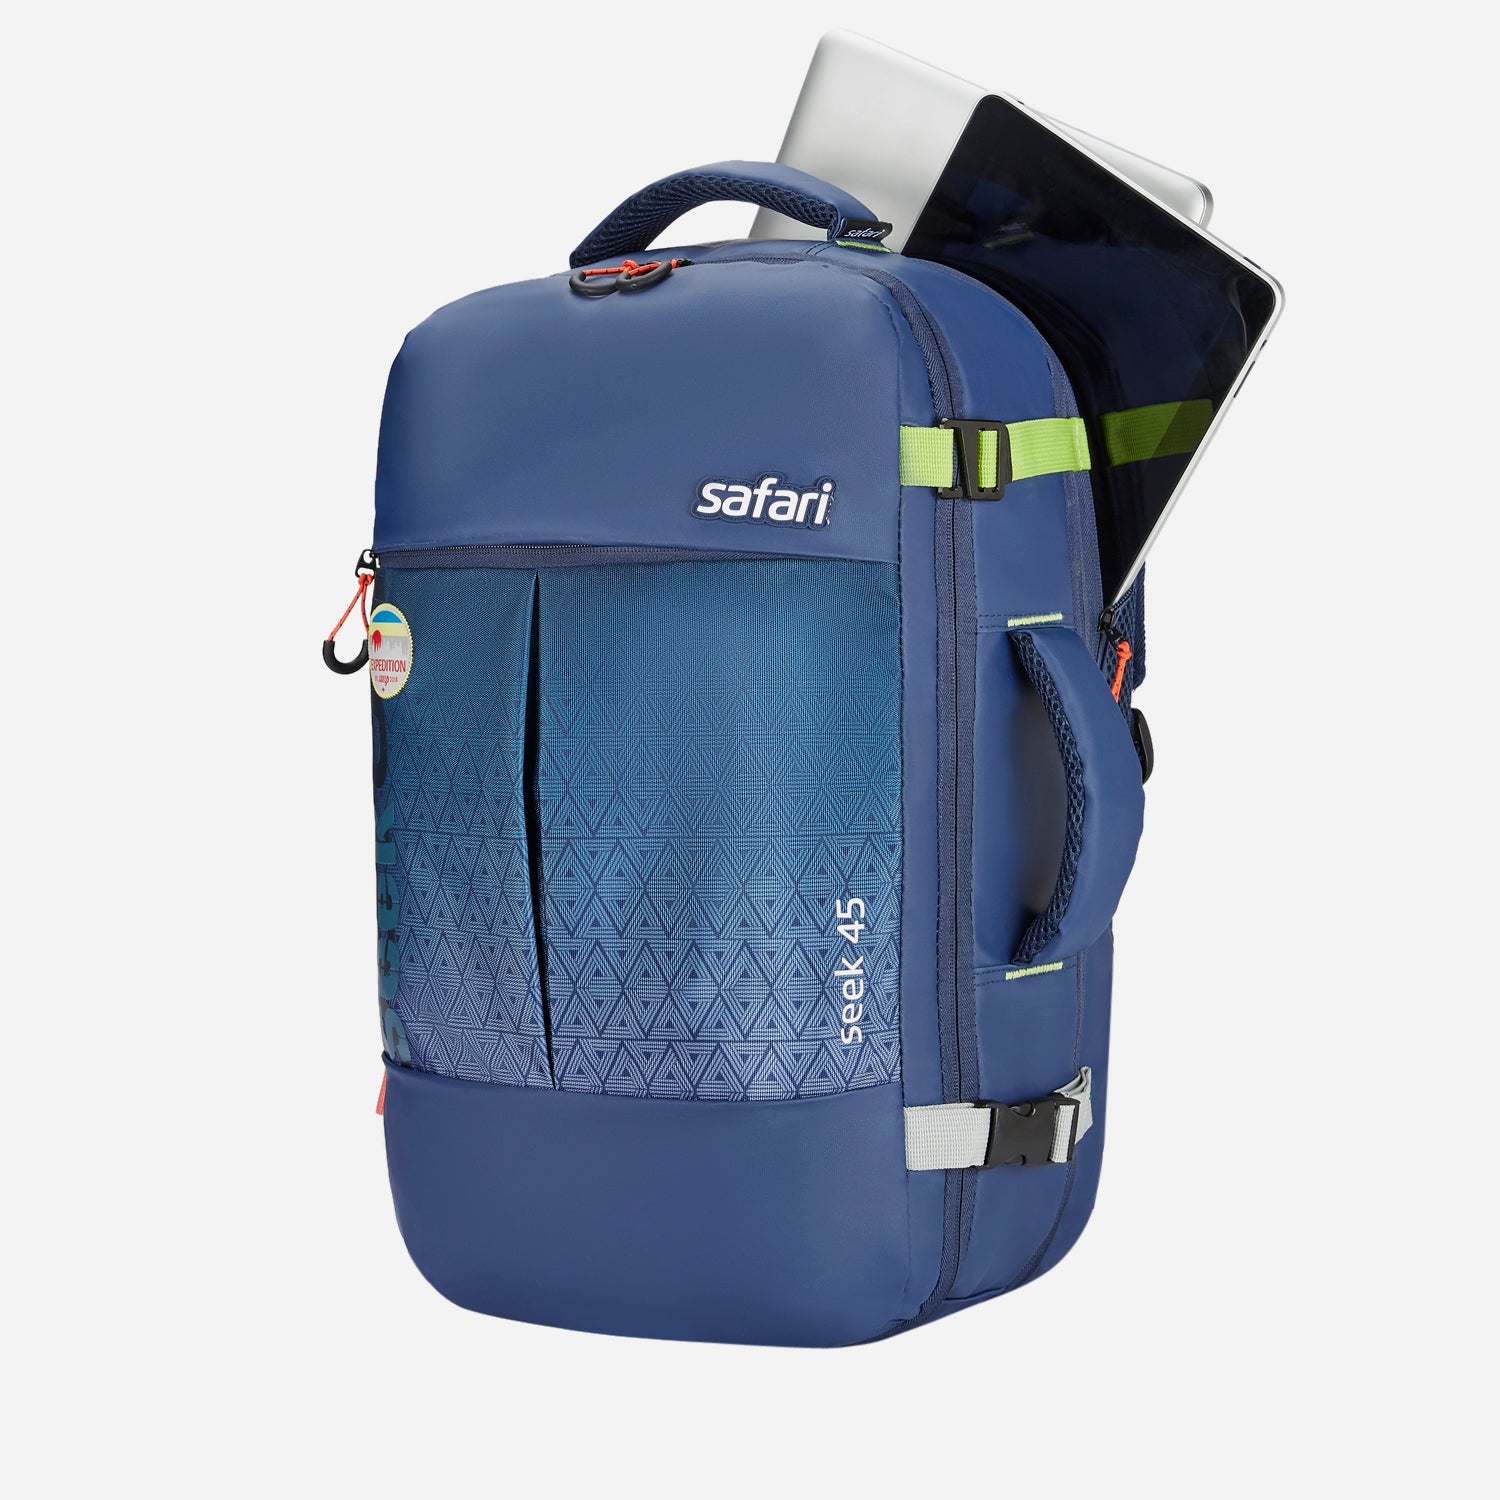 Seek 45L Overnighter Backpack and Curve Neckpillow in Combo Set - Blue